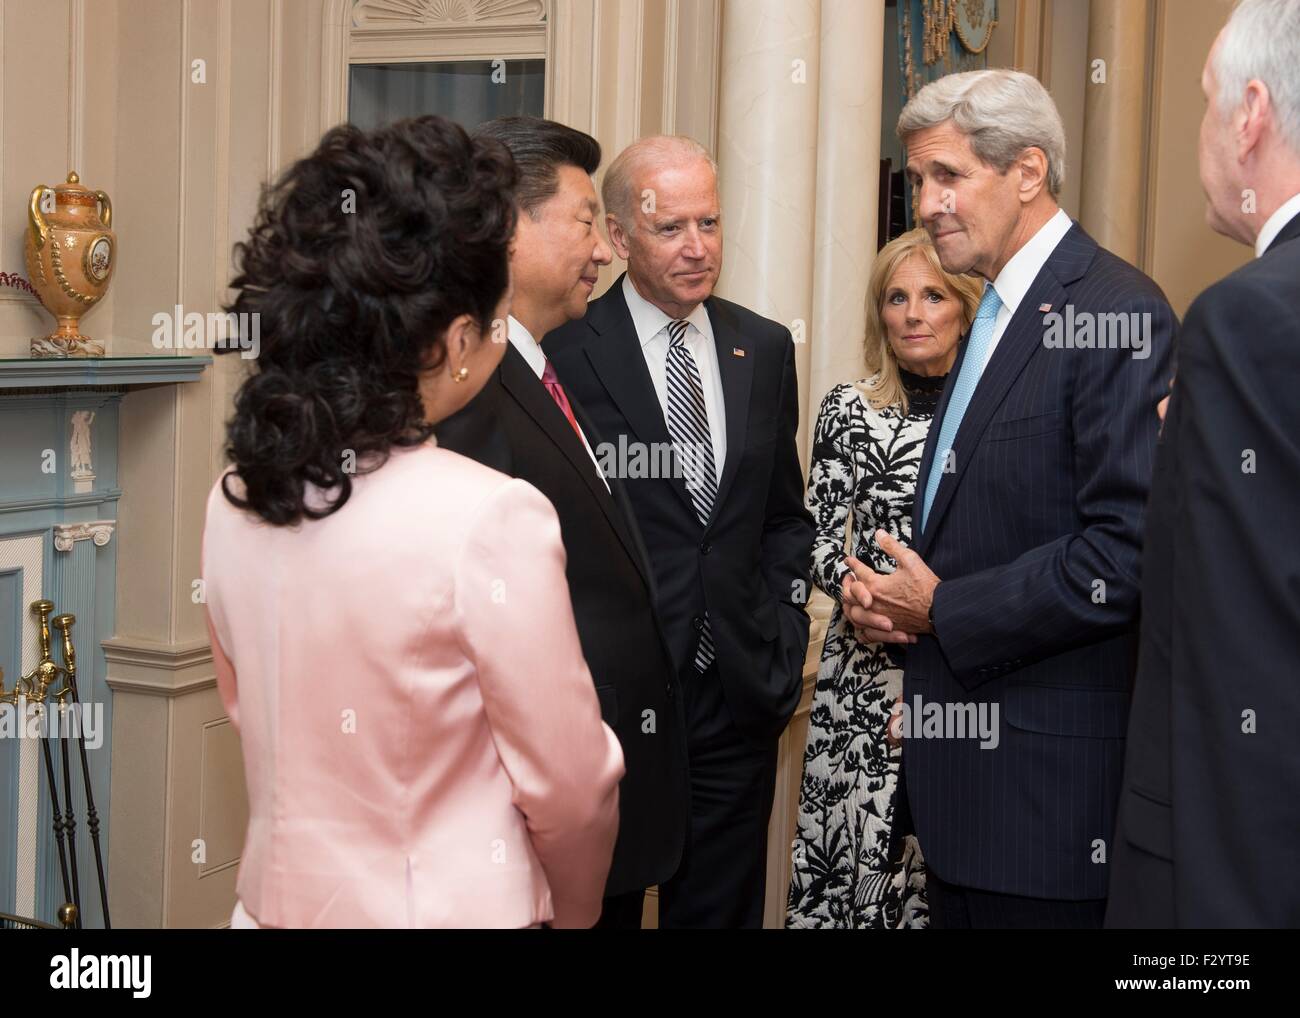 Washington DC, USA. 25th Sep, 2015. U.S. Vice President Joe Biden and Secretary of State John Kerry talk with Chinese President Xi Jinping as Dr. Jill Biden and Peng Liyuan look on at a State Luncheon in the Chinese President's honor at the Department of State September 25, 2015 in Washington, DC. Stock Photo